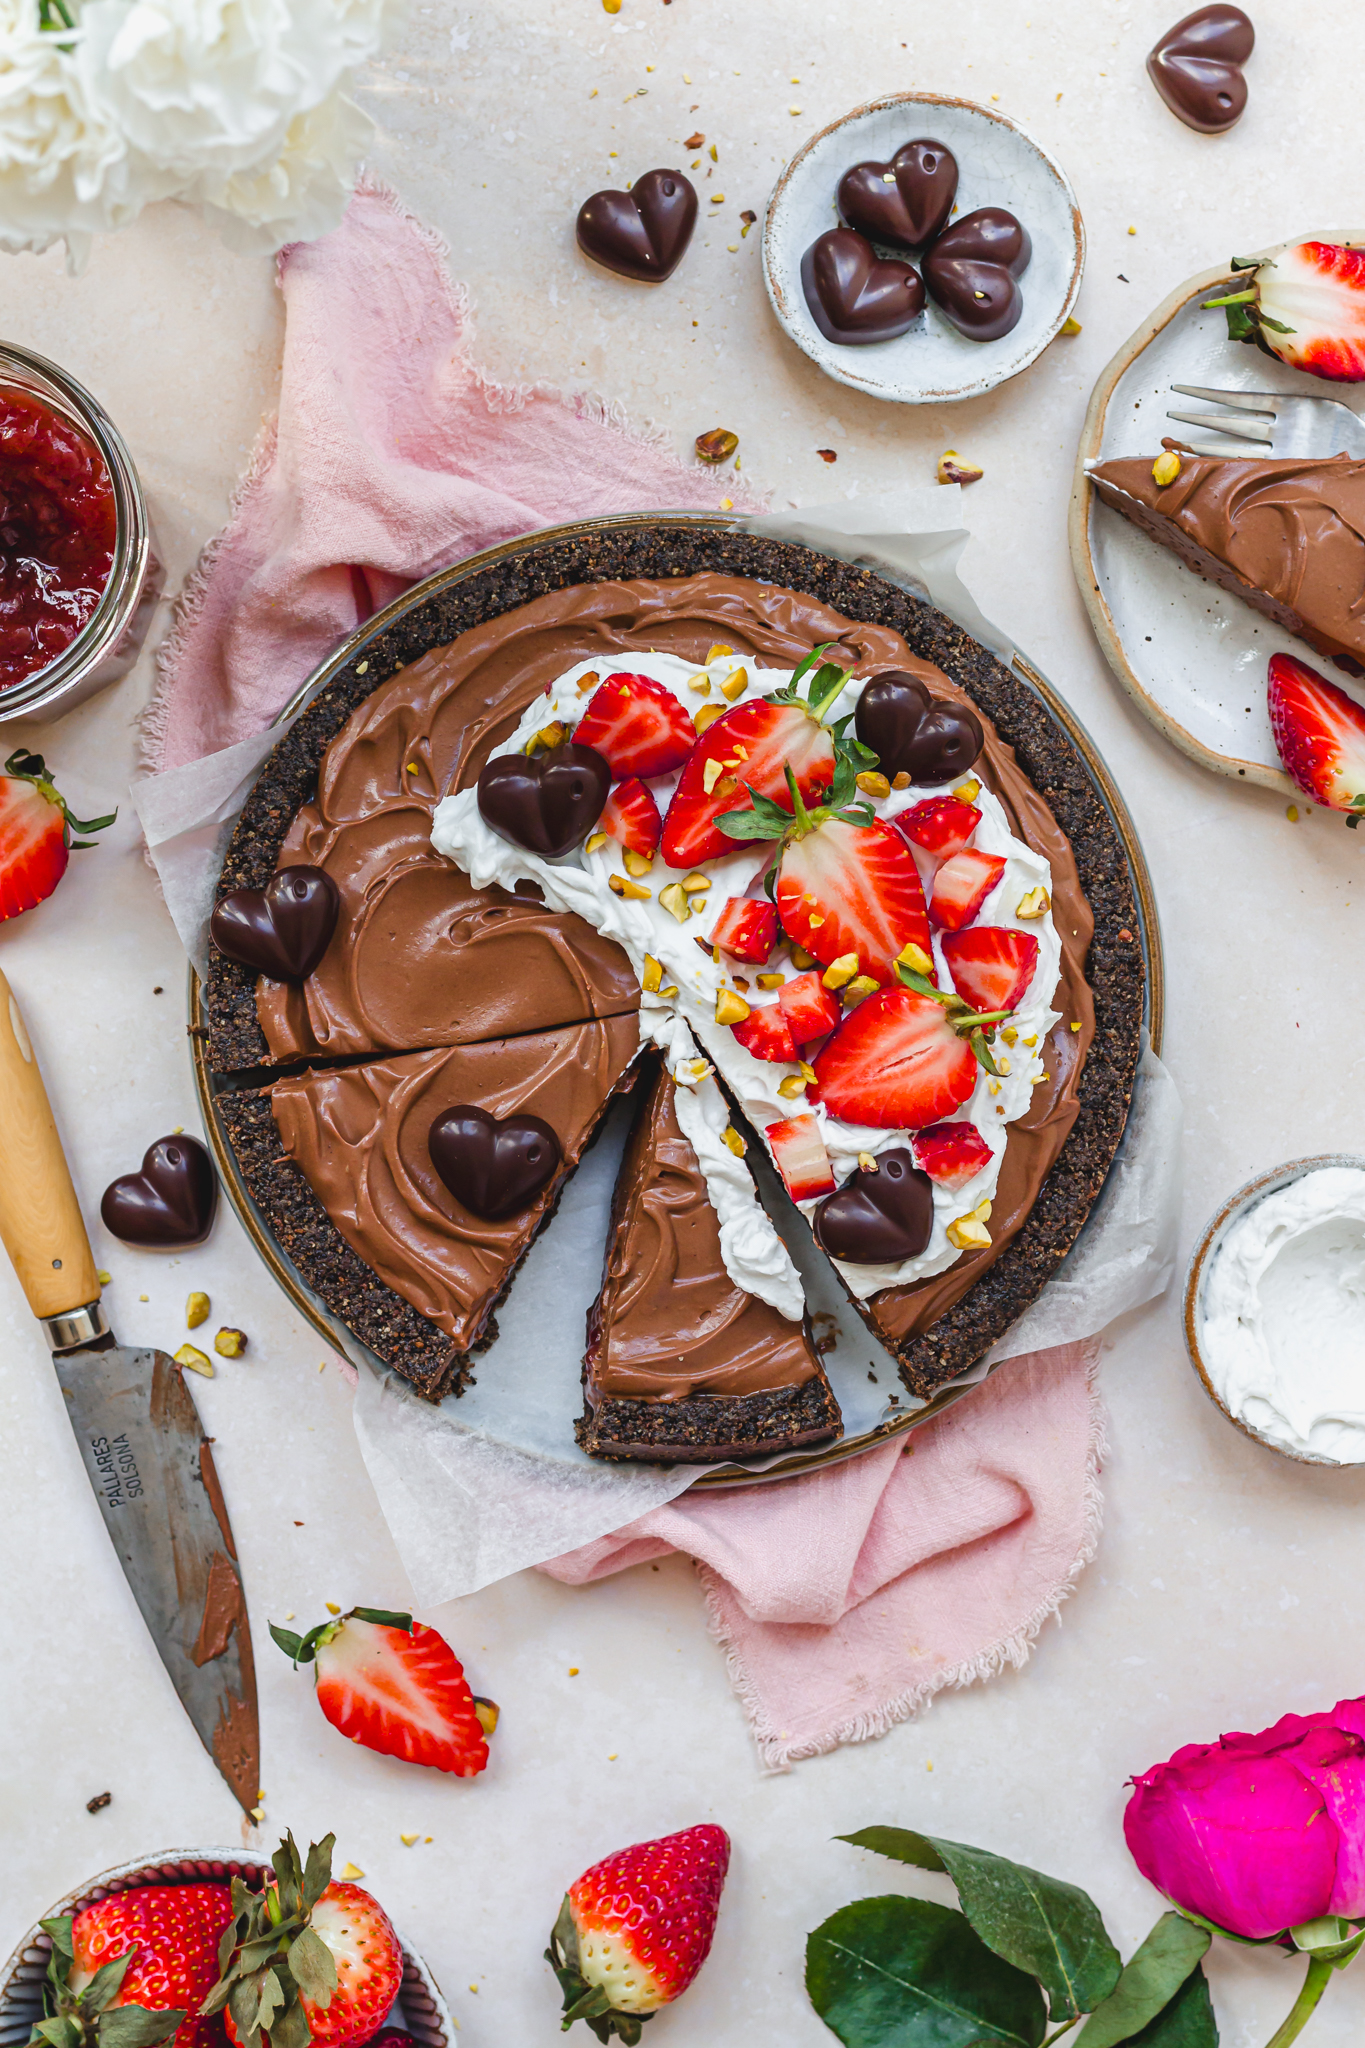 Slices of Chocolate Strawberry Mousse Tart